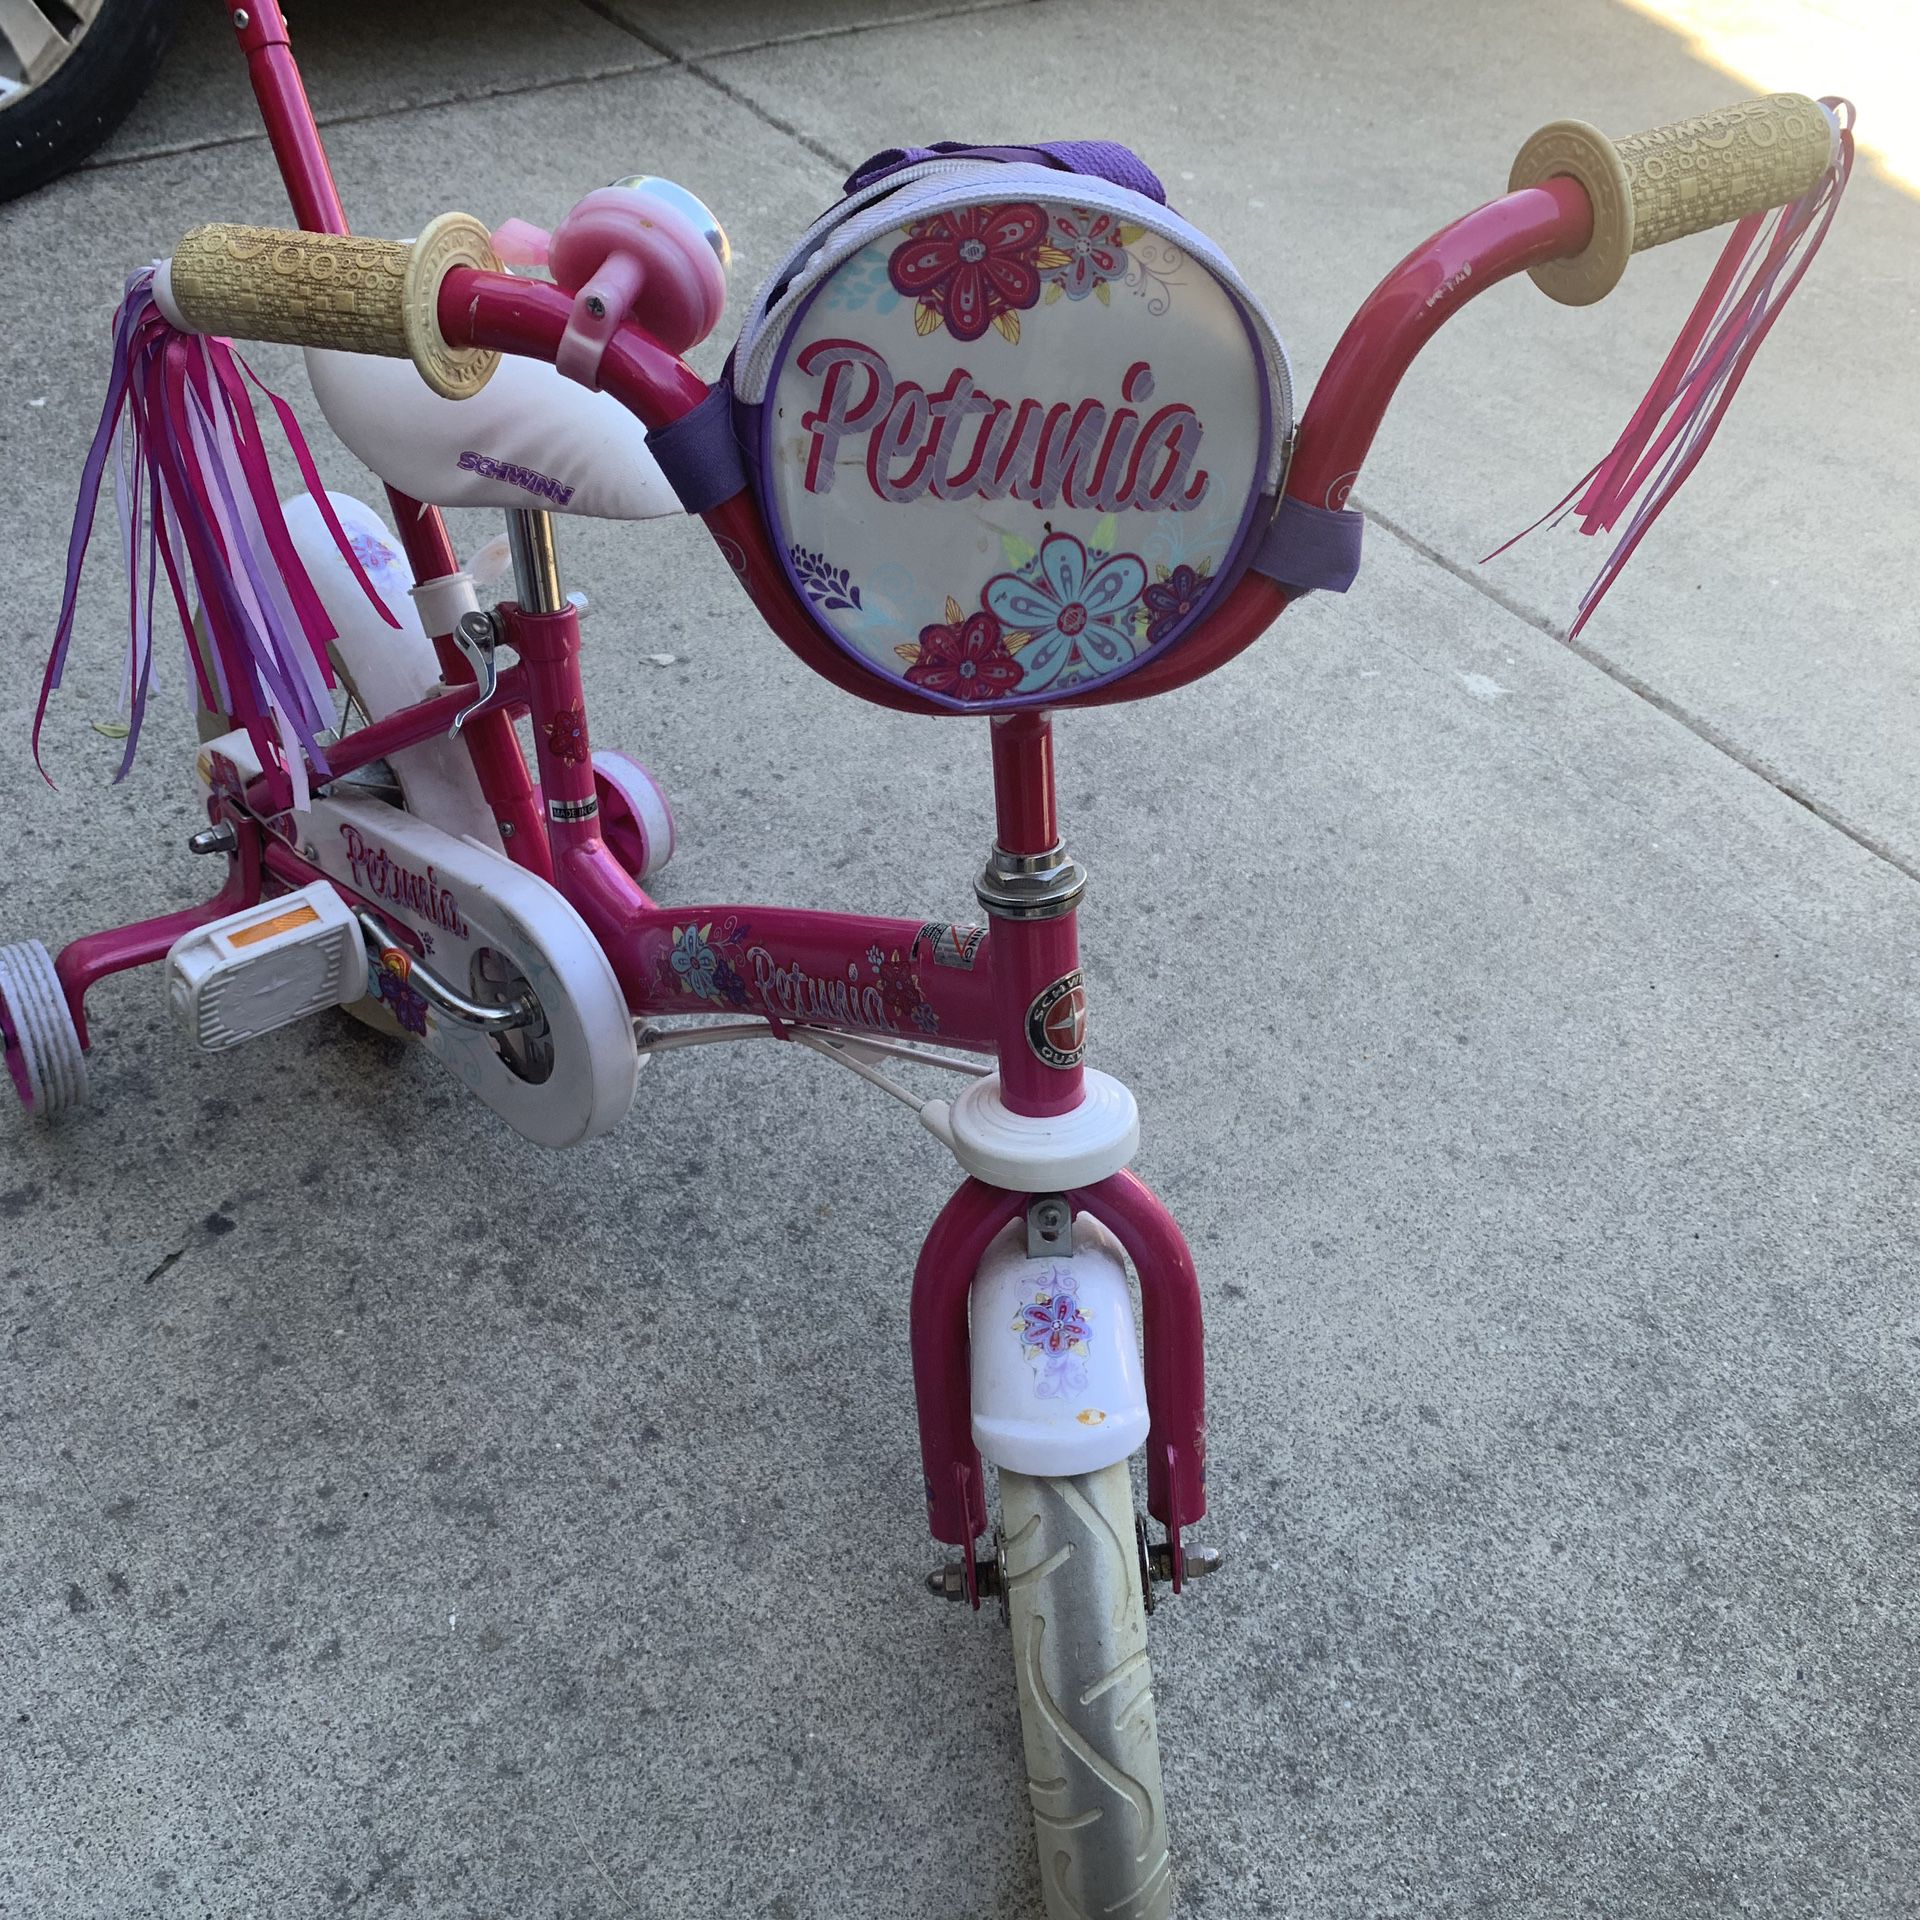 Schwinn Petunia and Grit Steerable Kids Bikes, Featuring Push Handle for Easy Steering, Training Wheels, Enclosed Chain Guard, Quick-Adjust Seat, and